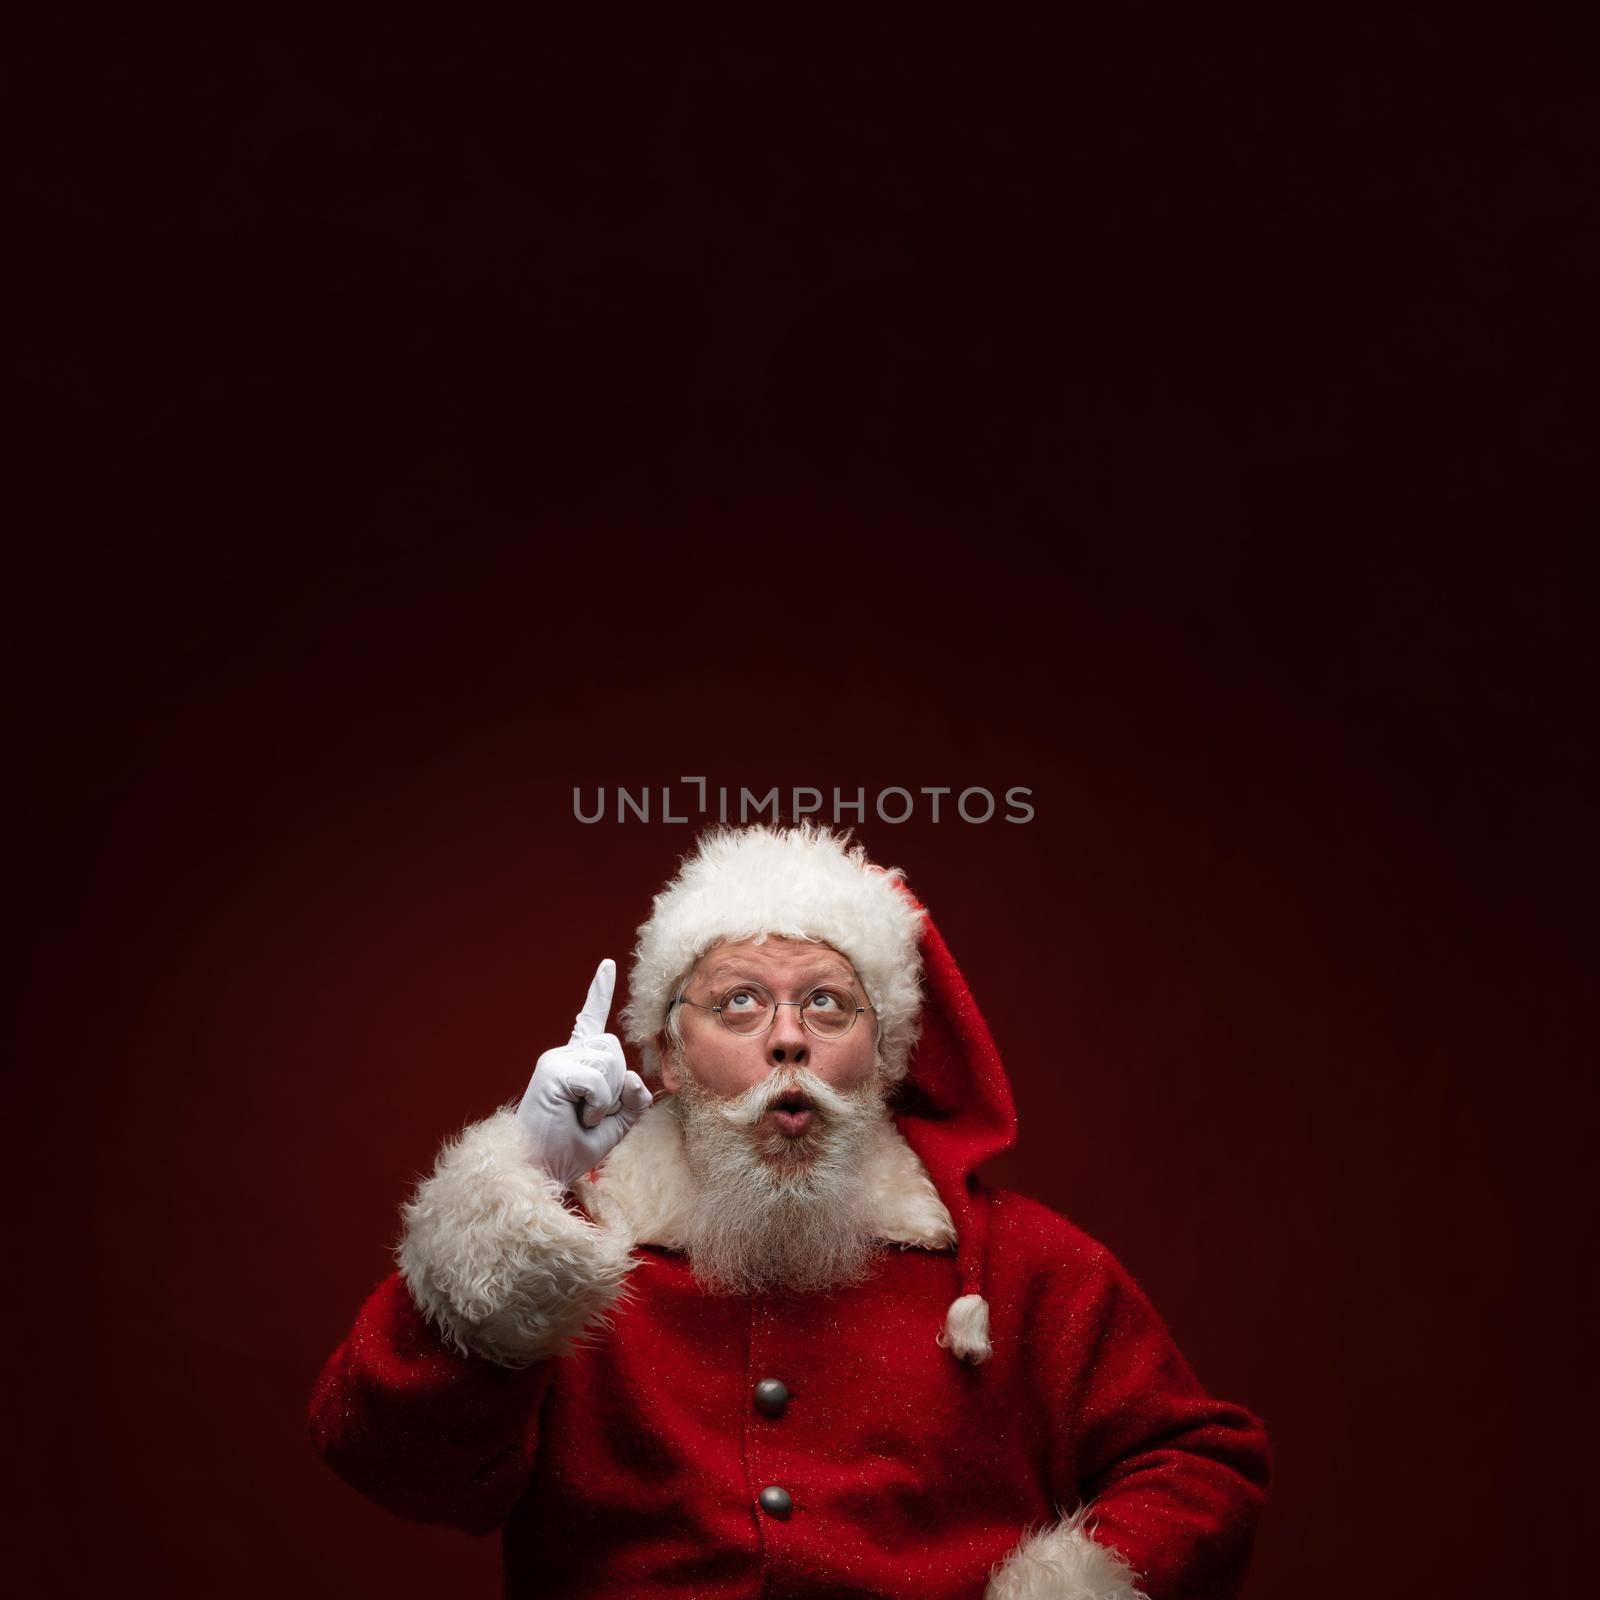 Santa Claus pointing up by ALotOfPeople